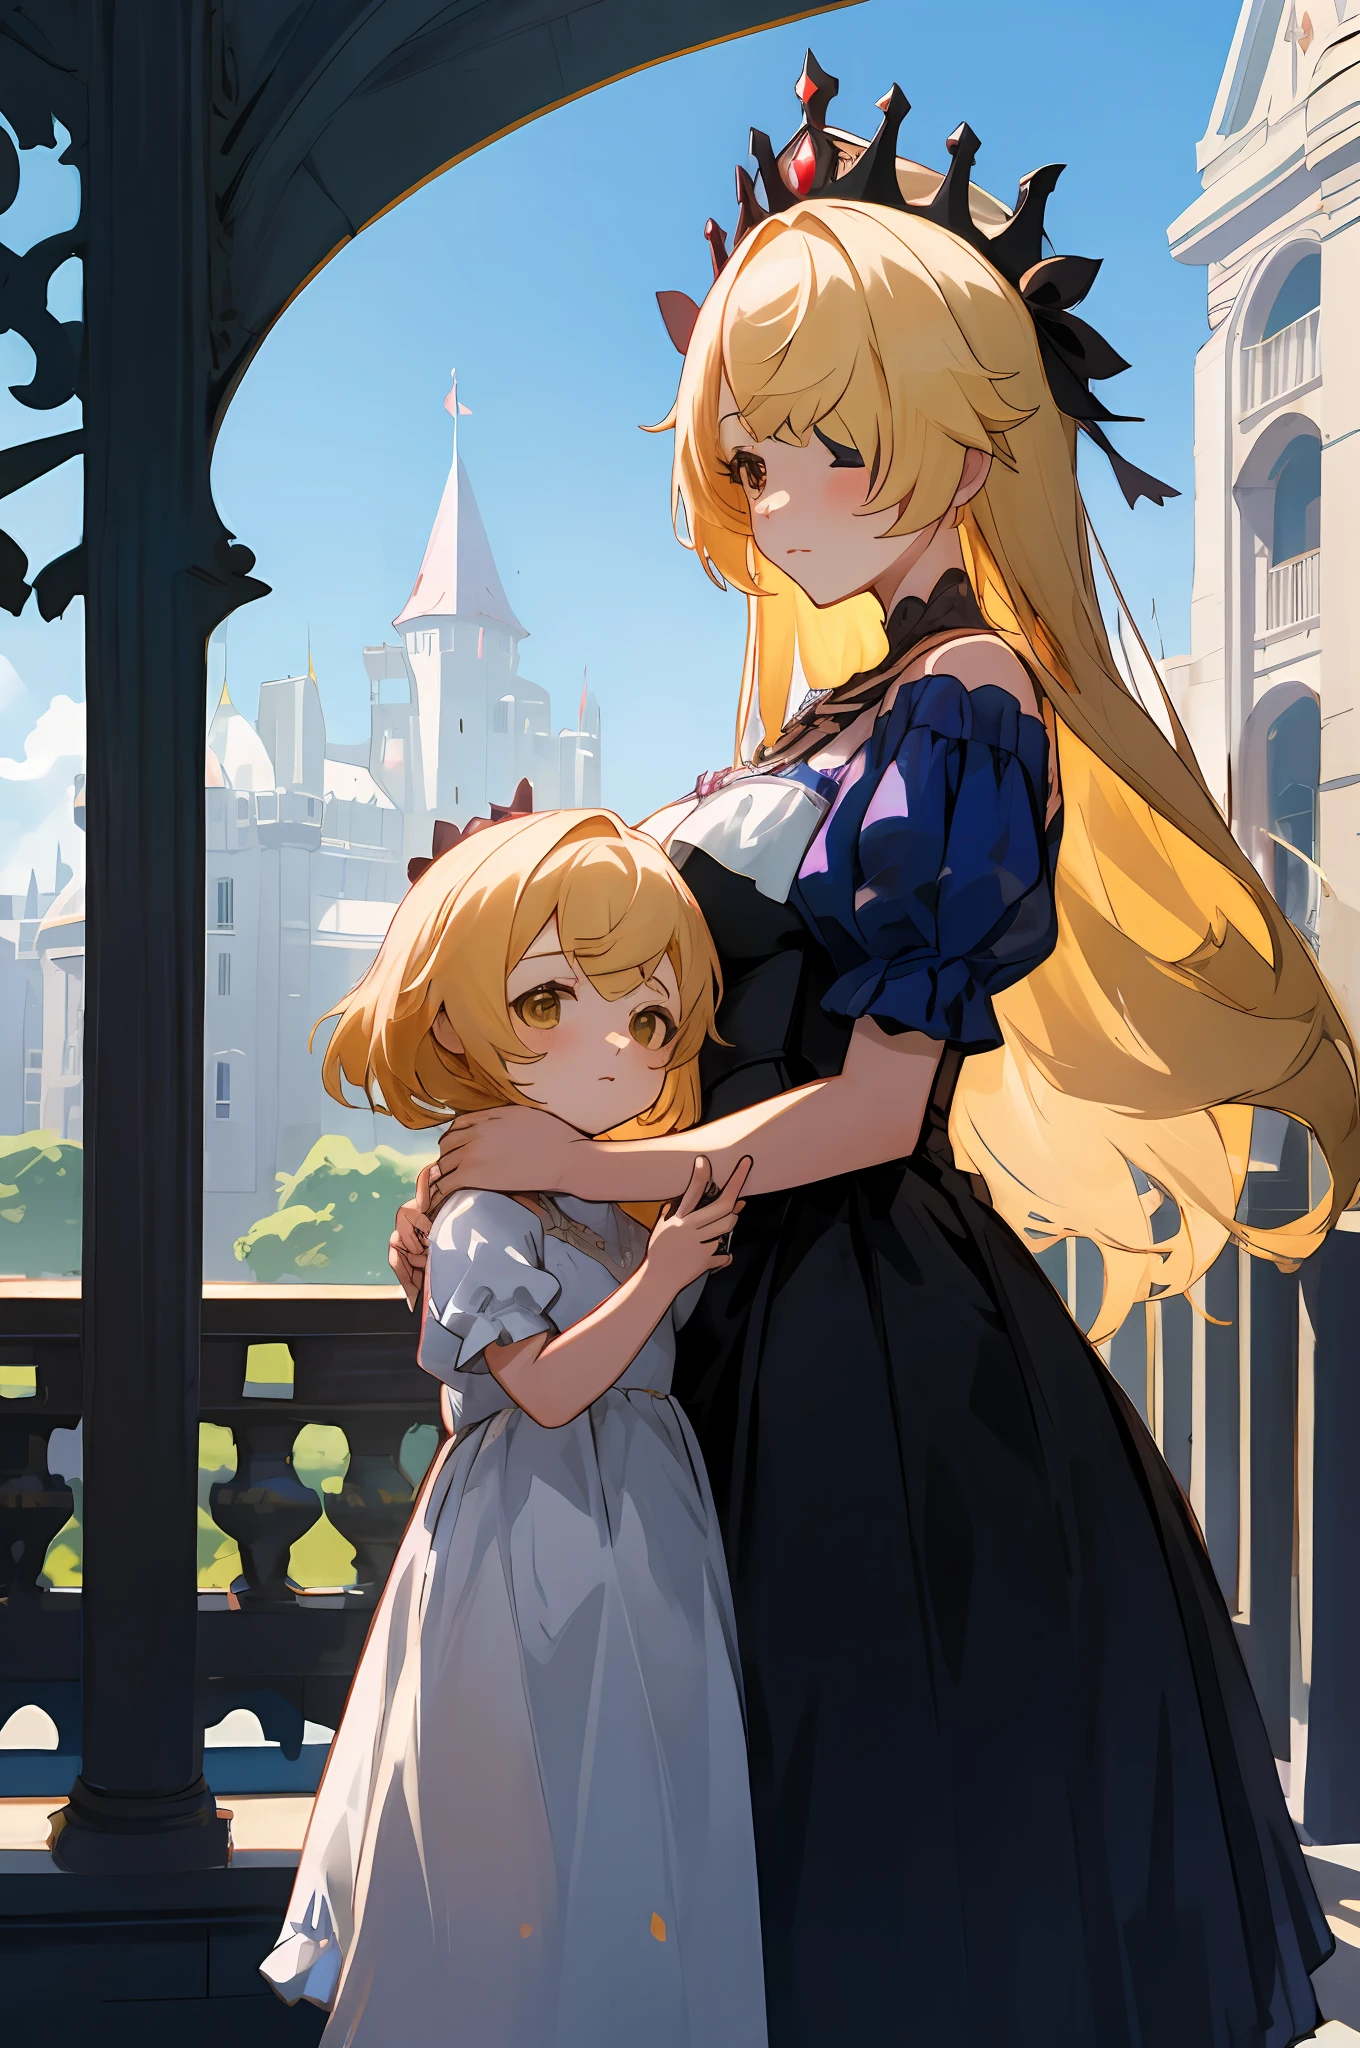 anime image of two women dressed in dress posing for a picture like princess clothing in summer, beautiful decoration on dress, palace a girl in palace, long hair, yellow haired , anime fantasy illustration, from the azur lane videogame, genshin, Royal Princess detailed art, two beautiful anime girls, mother and child, symbol of maternal love, mother and child, such as photos of mother and child, Embarrassed, royal castle, His pet crow named Oz is flying